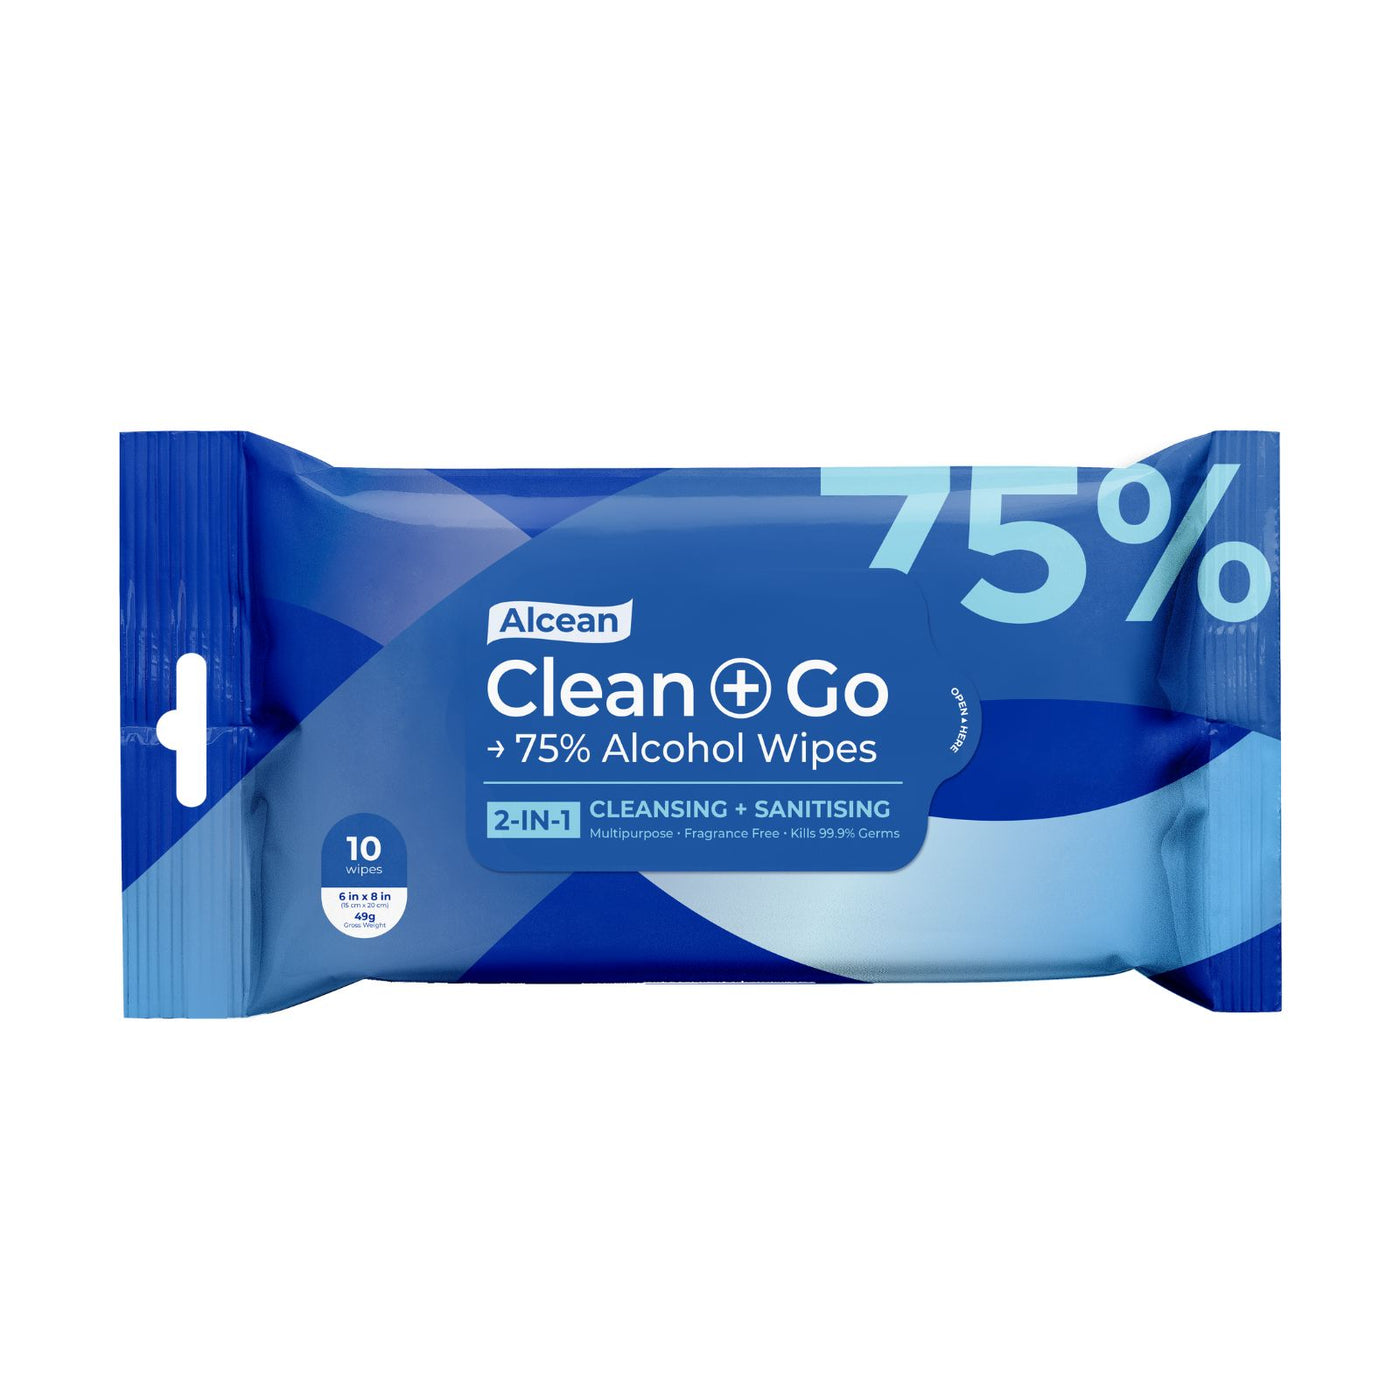 10 wipes (Bundle of 6) - 75% Alcohol Classic Wipes